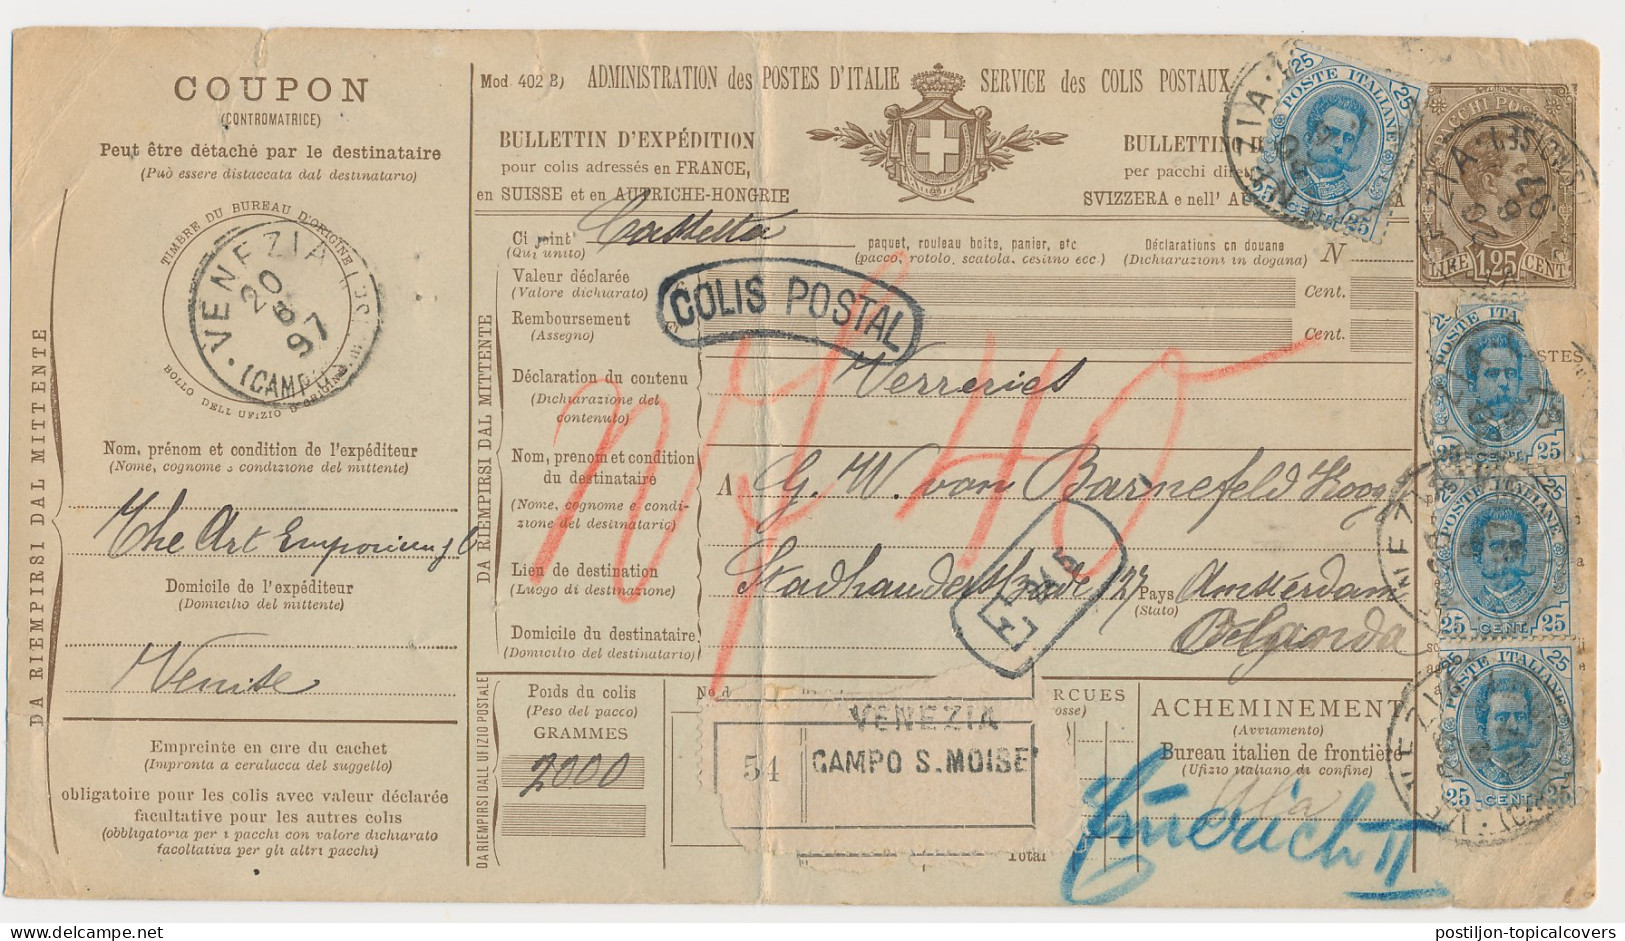 Trein Grootrondstempel : Amsterdam-Centr.Station P.P. 1897 - Covers & Documents